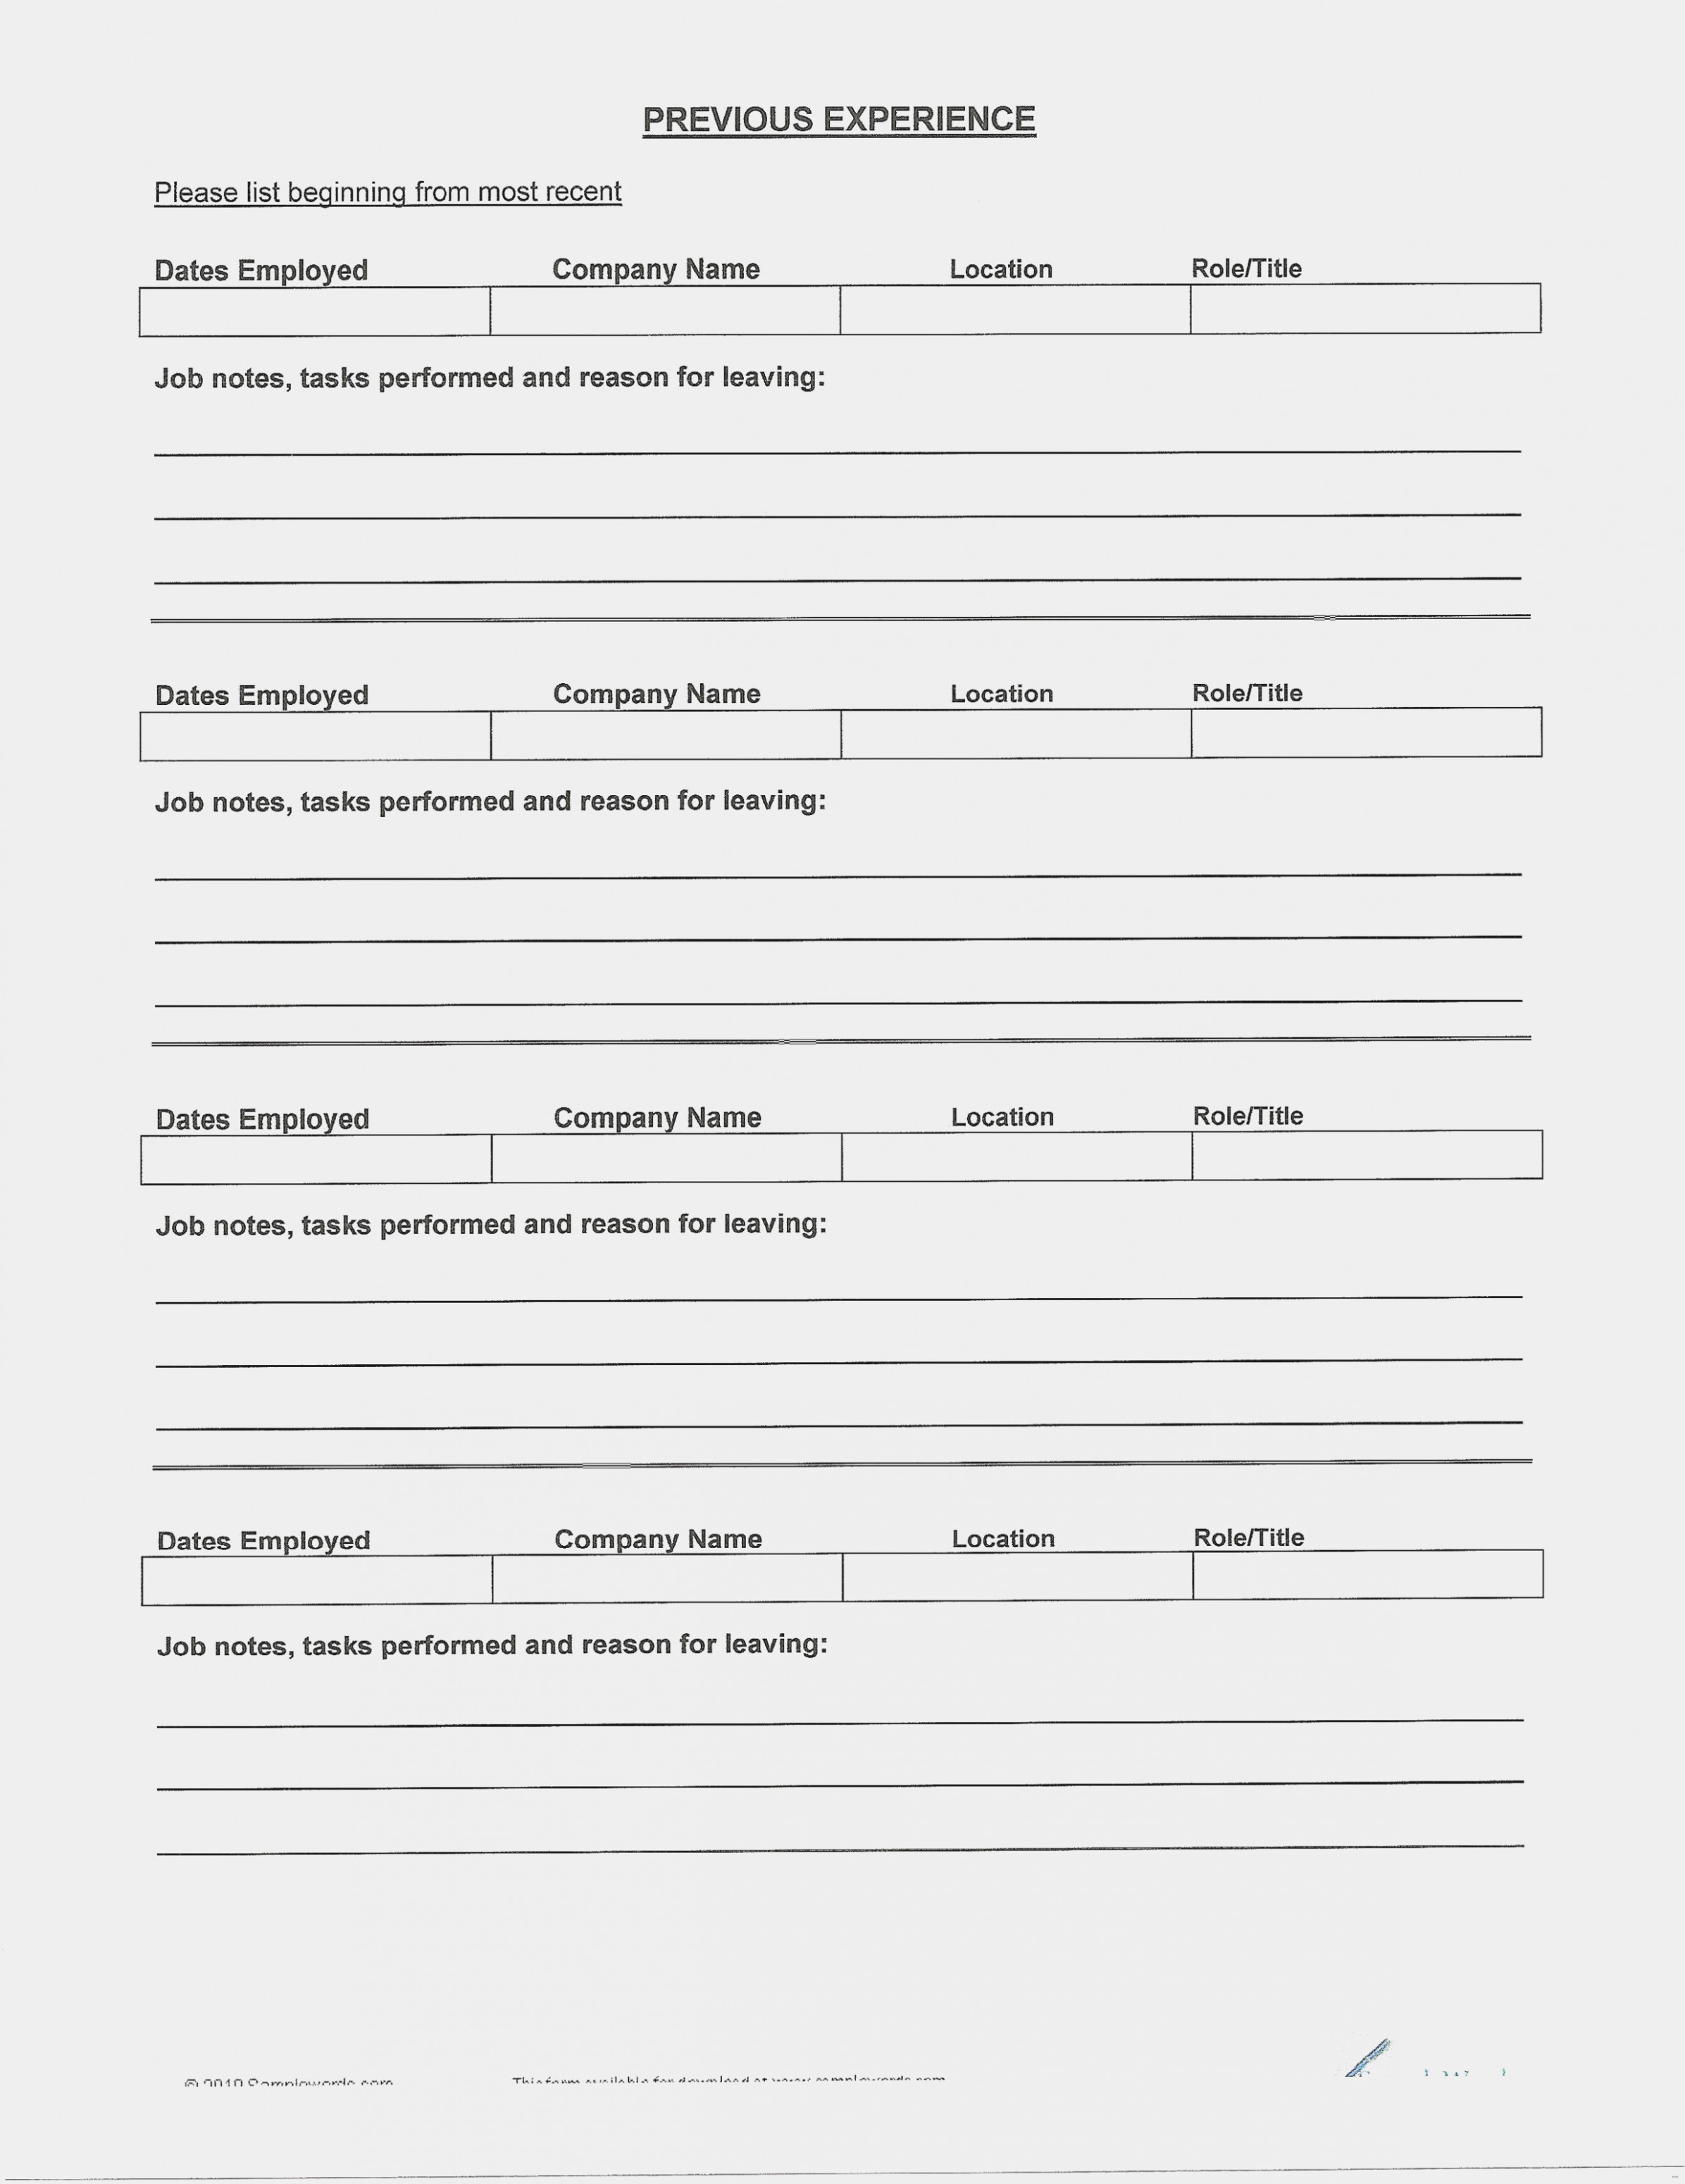 How To Fill Out A Resume How Do I Fill Out A Resume Resume Ideas How To Fill A Resume how to fill out a resume|wikiresume.com